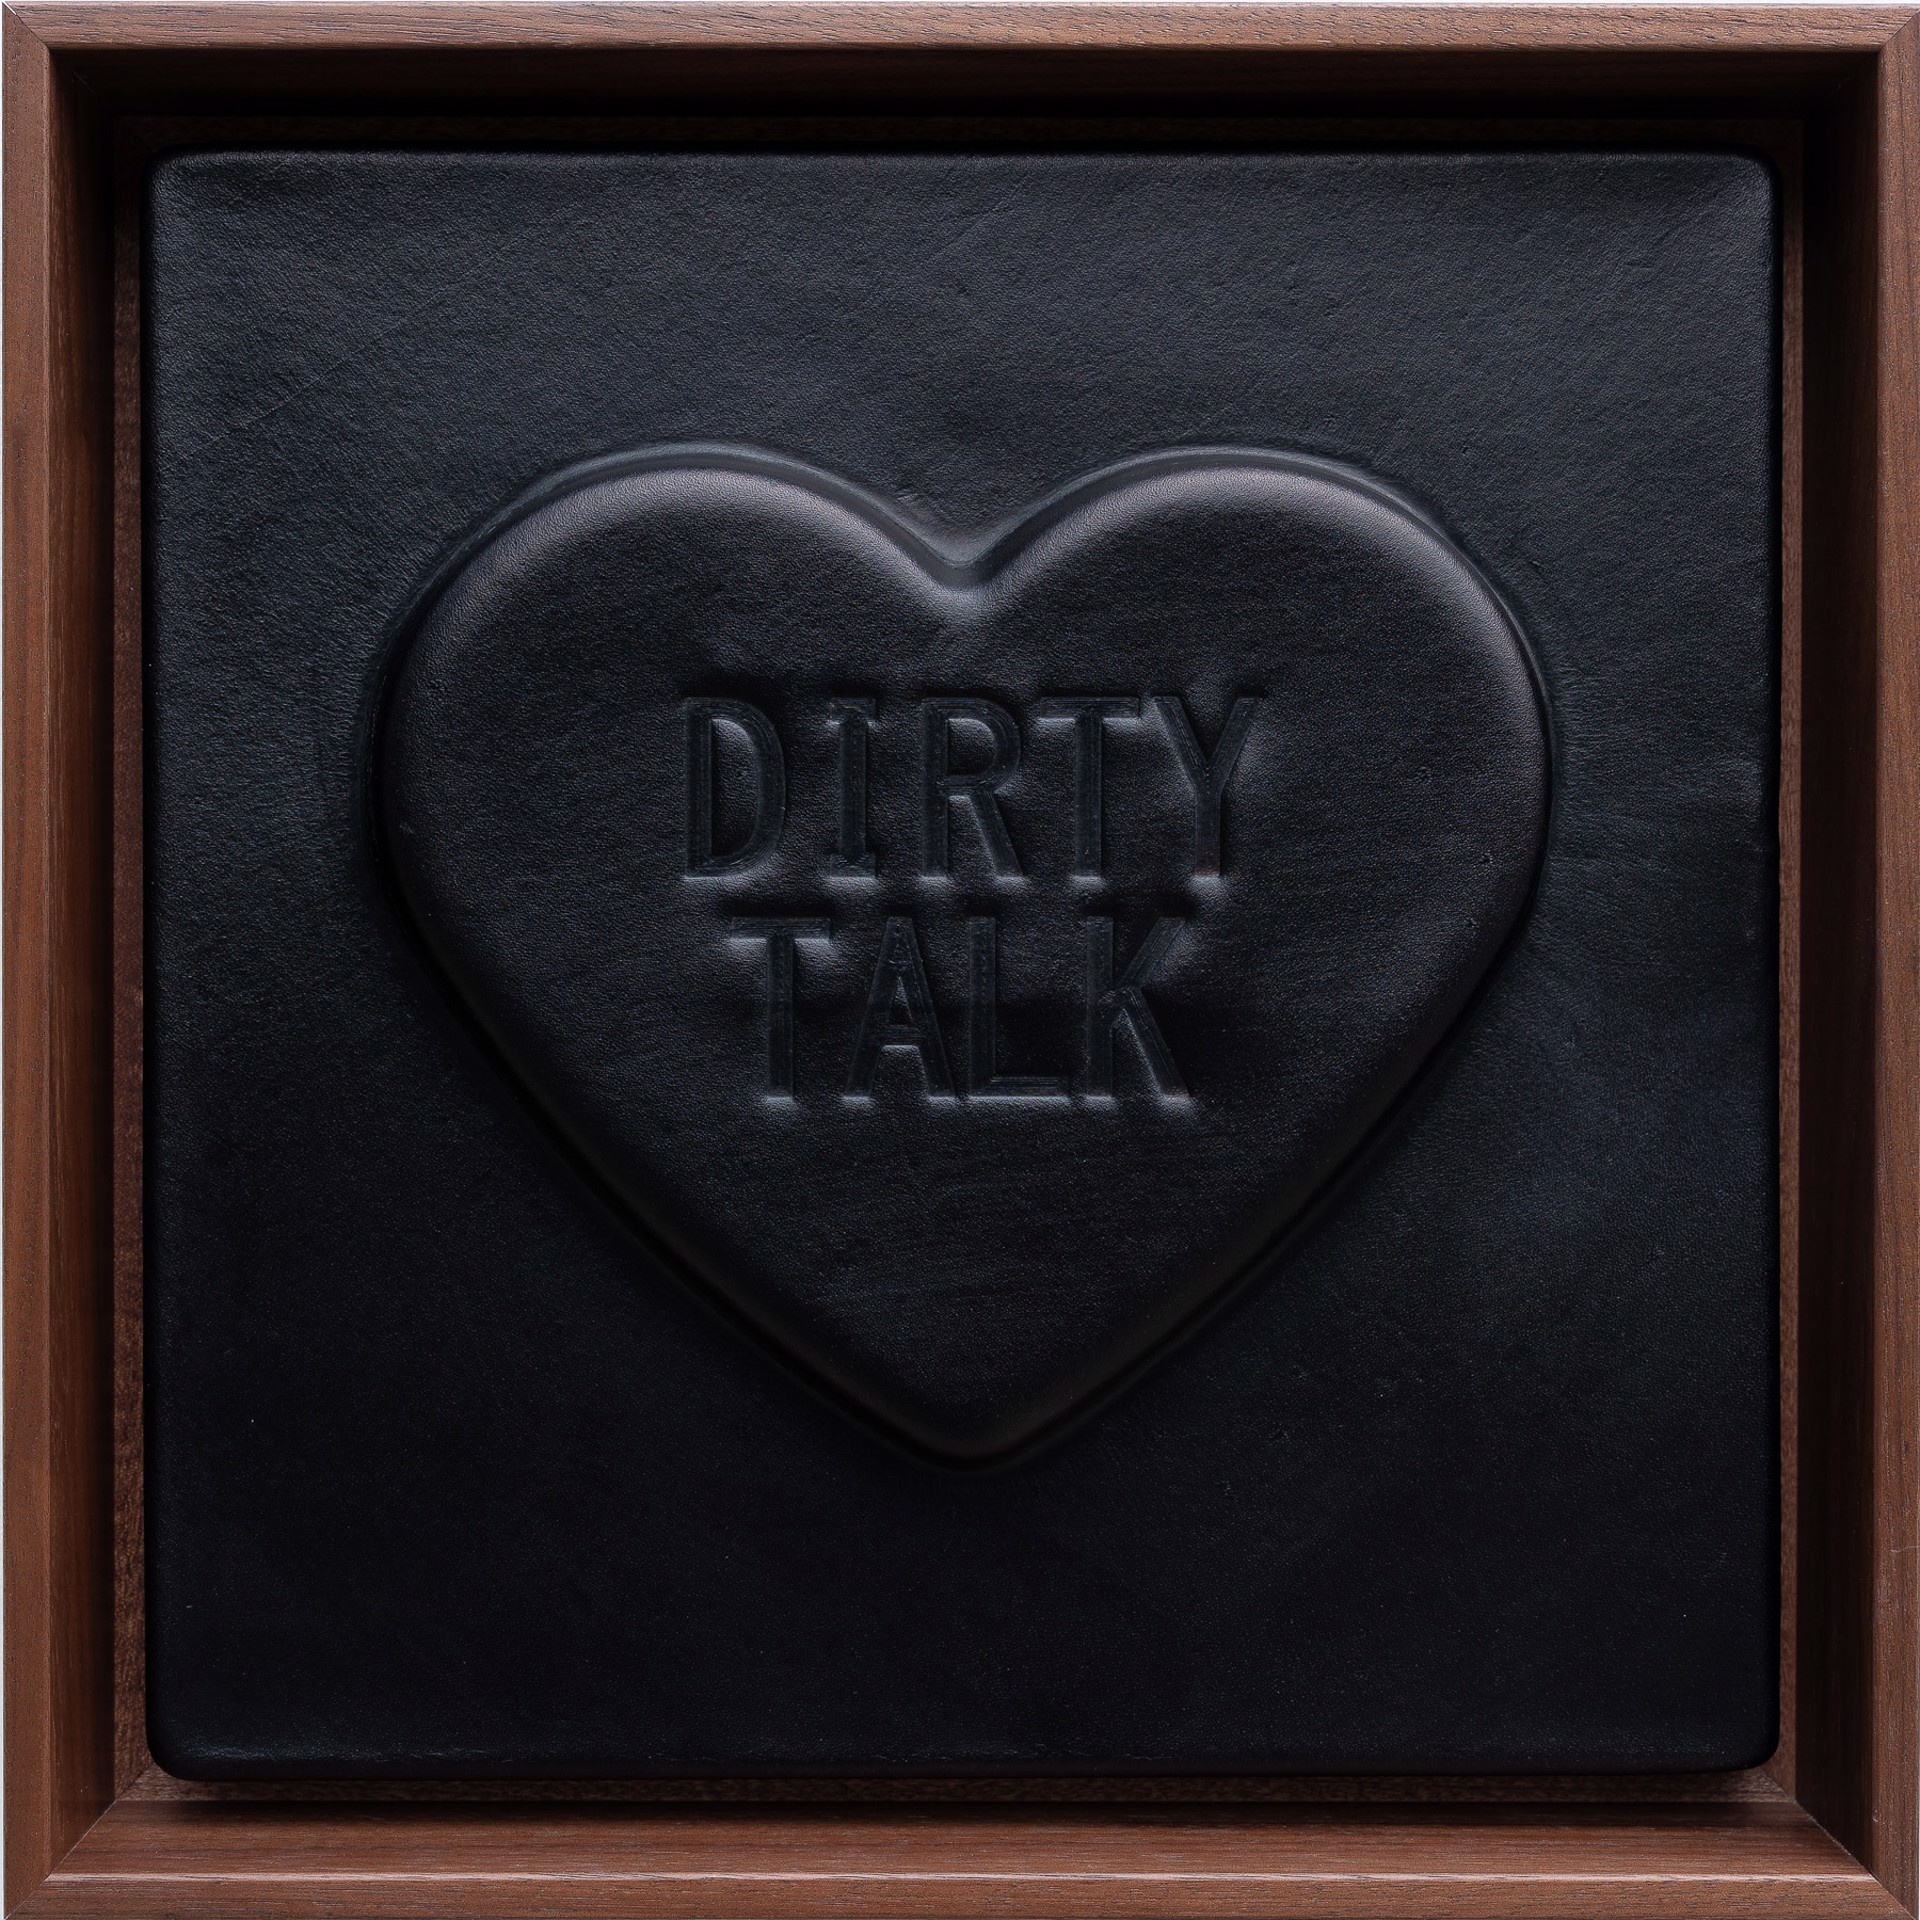 'DIRTY TALK' - Sweetheart series by Mx. Hyde